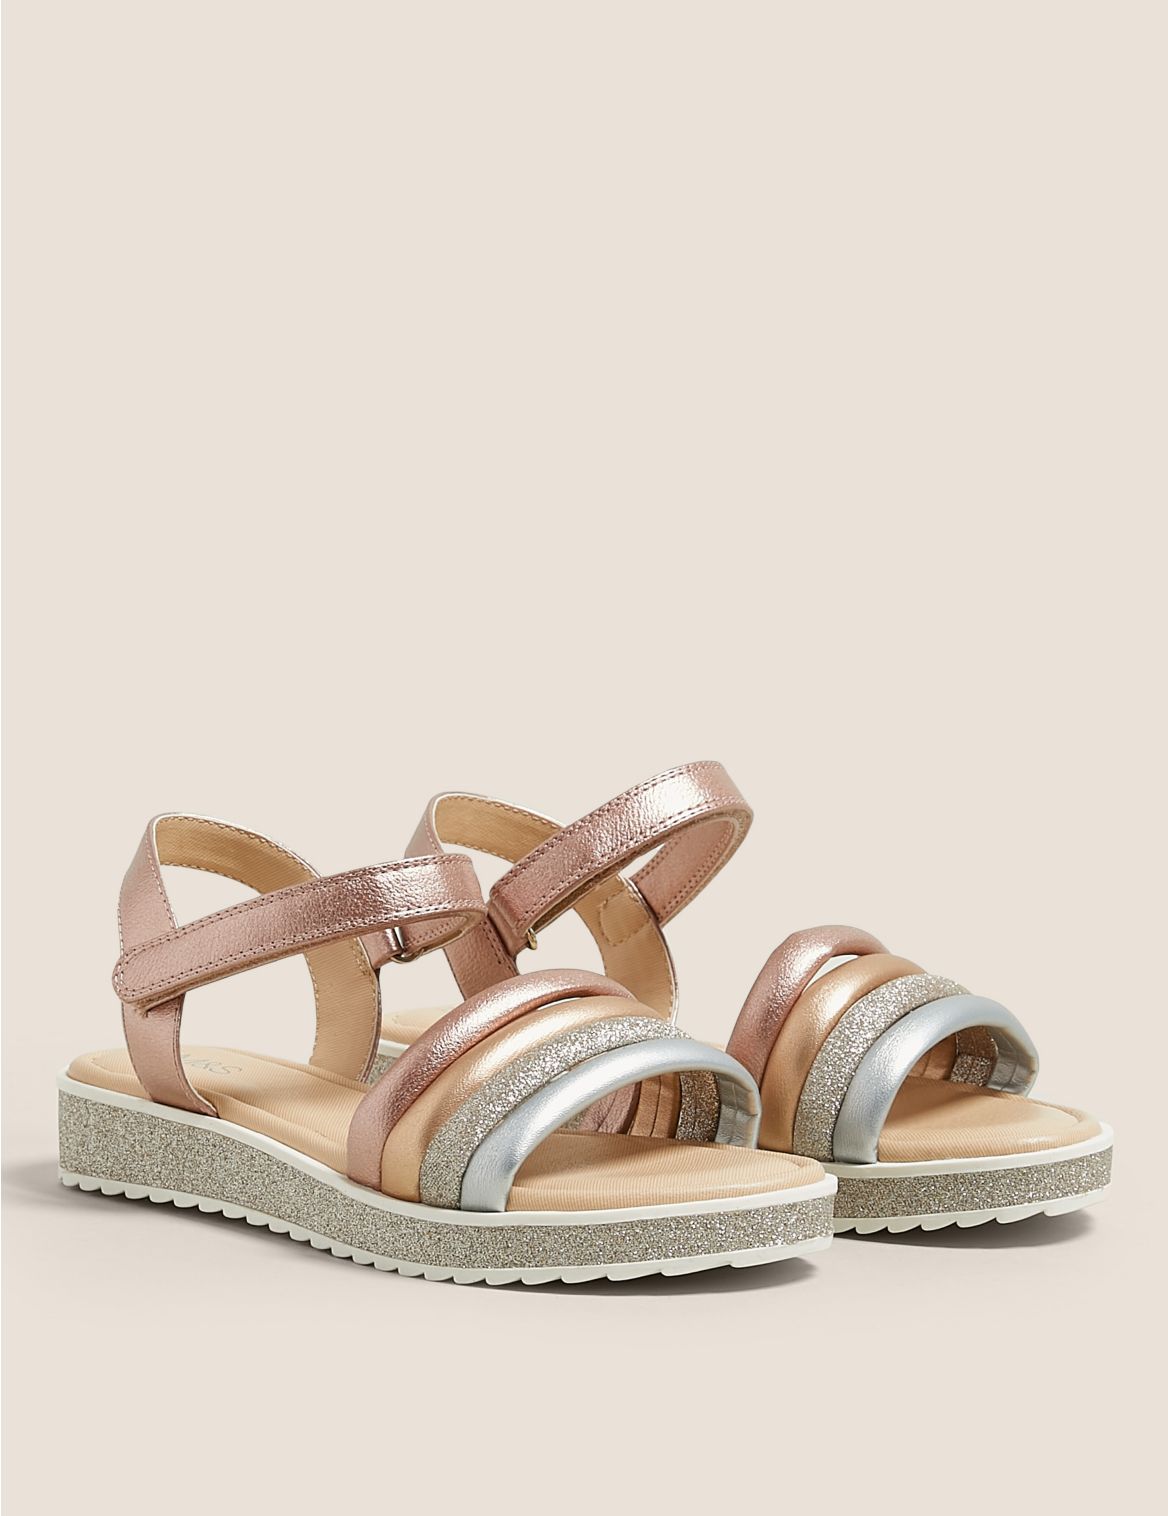 Kids' Riptape Metallic and Glitter Sandals (13 Small - 6 Larger) brown